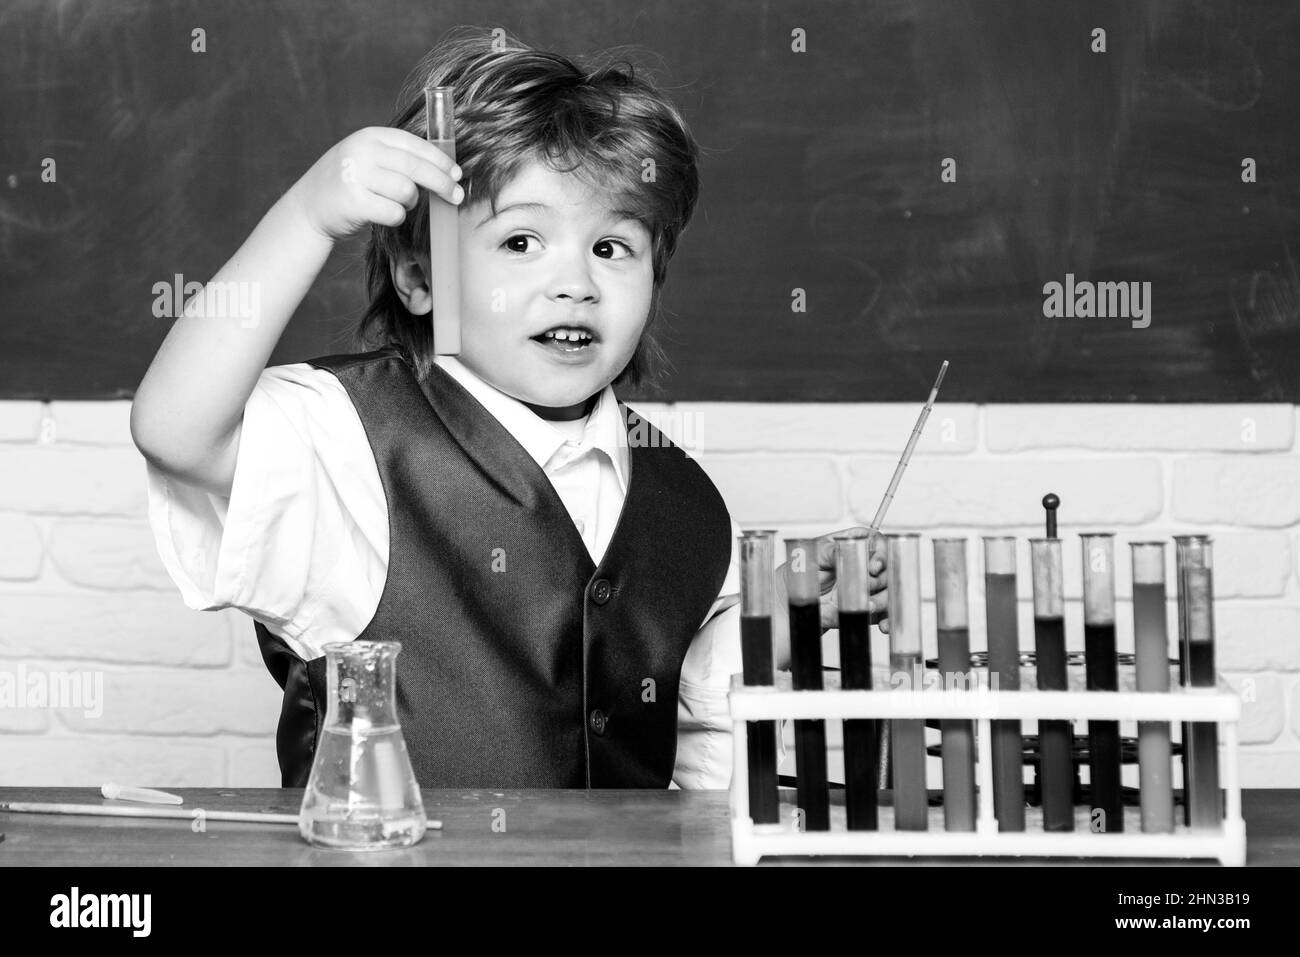 Back to school. Preschooler. They carried out a new experiment in chemistry. Chemistry lesson. Kid is learning in class on background of blackboard Stock Photo